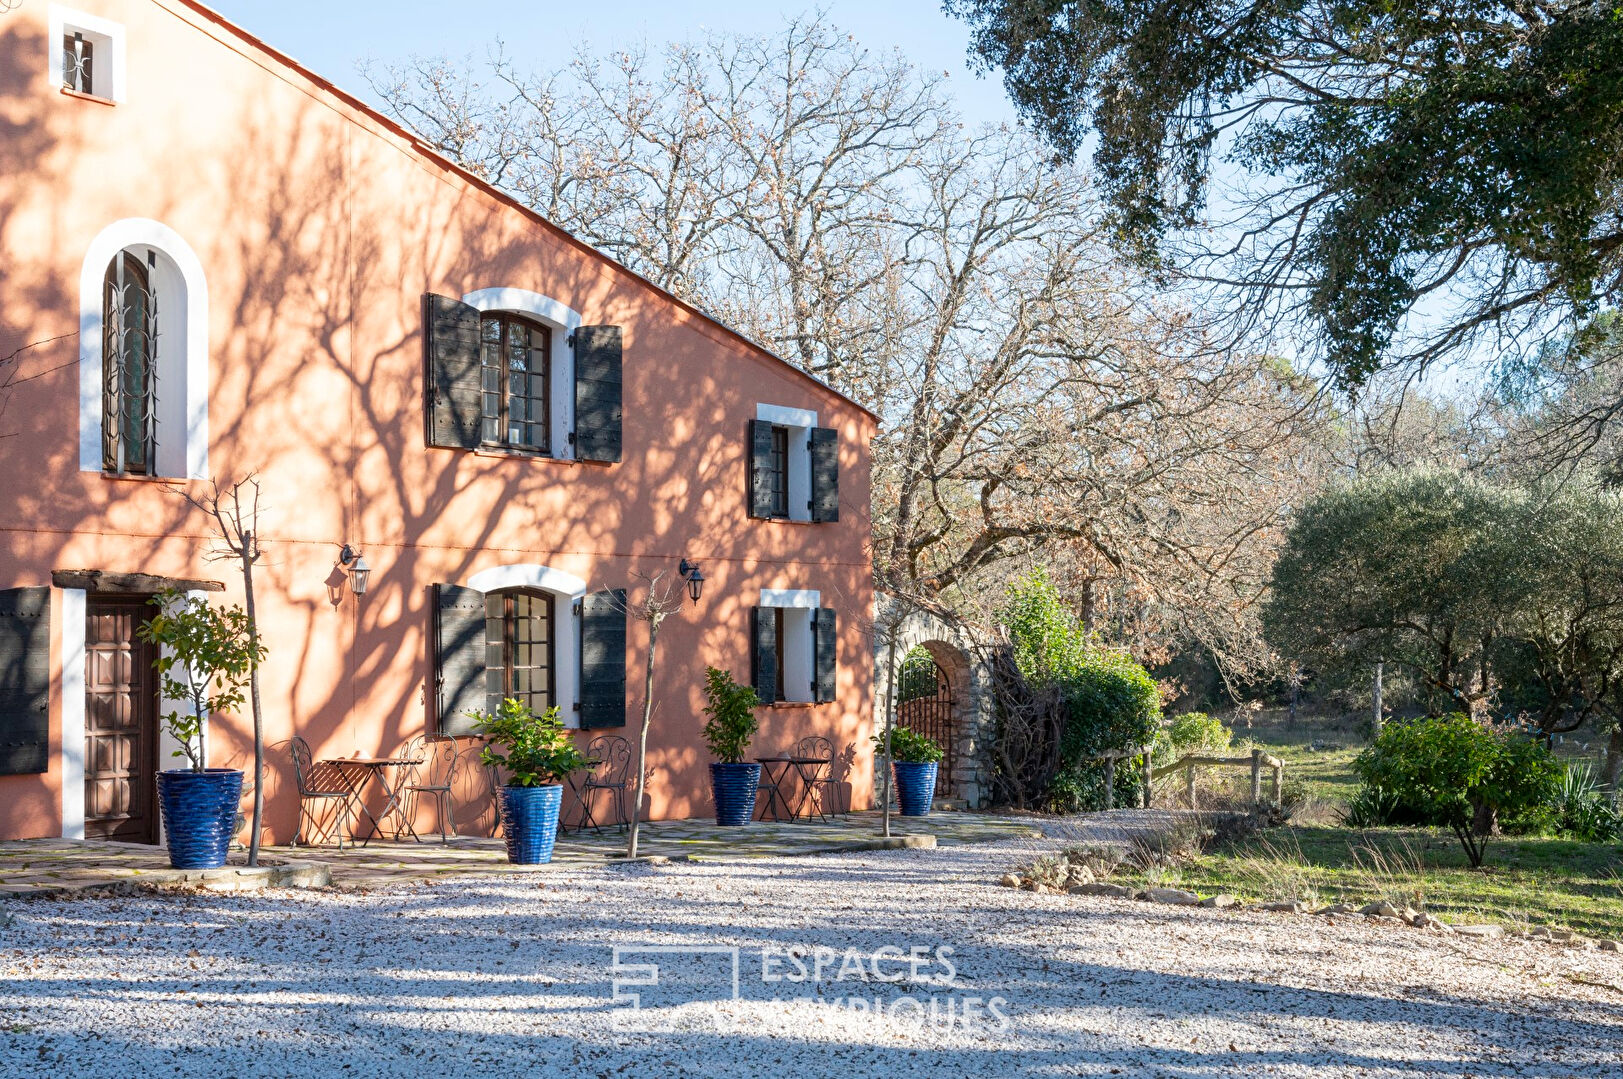 Historic bastide in a privileged area with swimming pool, gardian house and tennis court